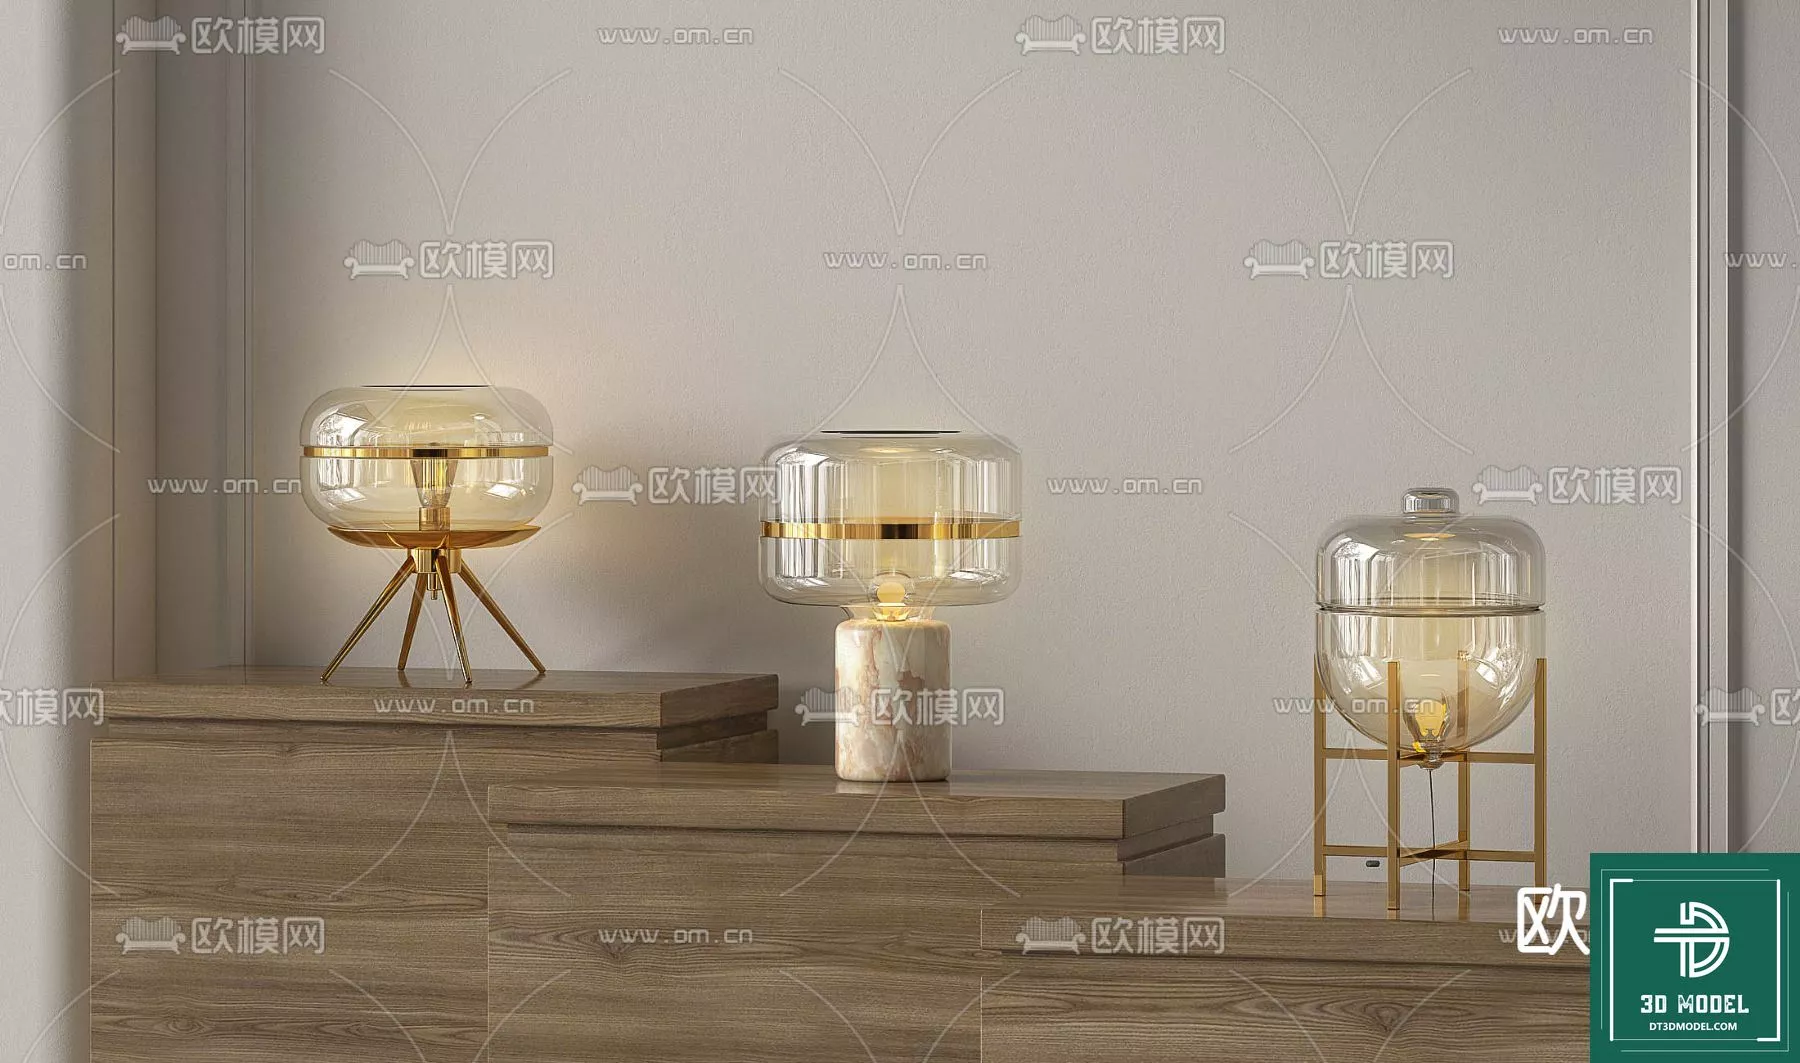 MODERN TABLE LAMP - SKETCHUP 3D MODEL - VRAY OR ENSCAPE - ID14533